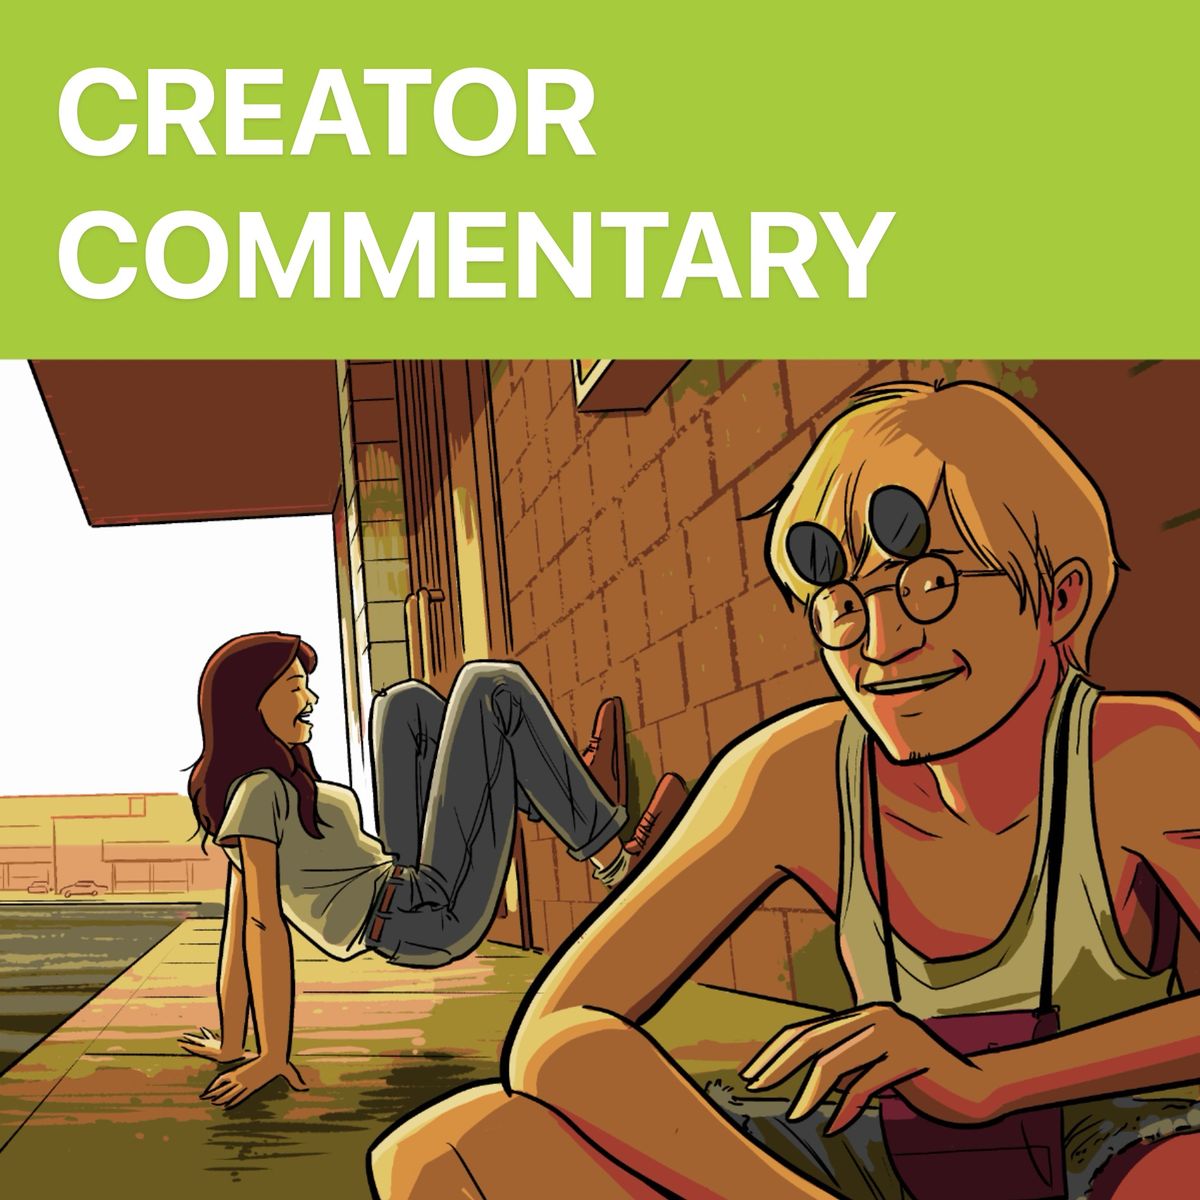 CREATOR COMMENTARY" image: A girl leans against a brick wall; a blonde boy with glasses sits nearby.